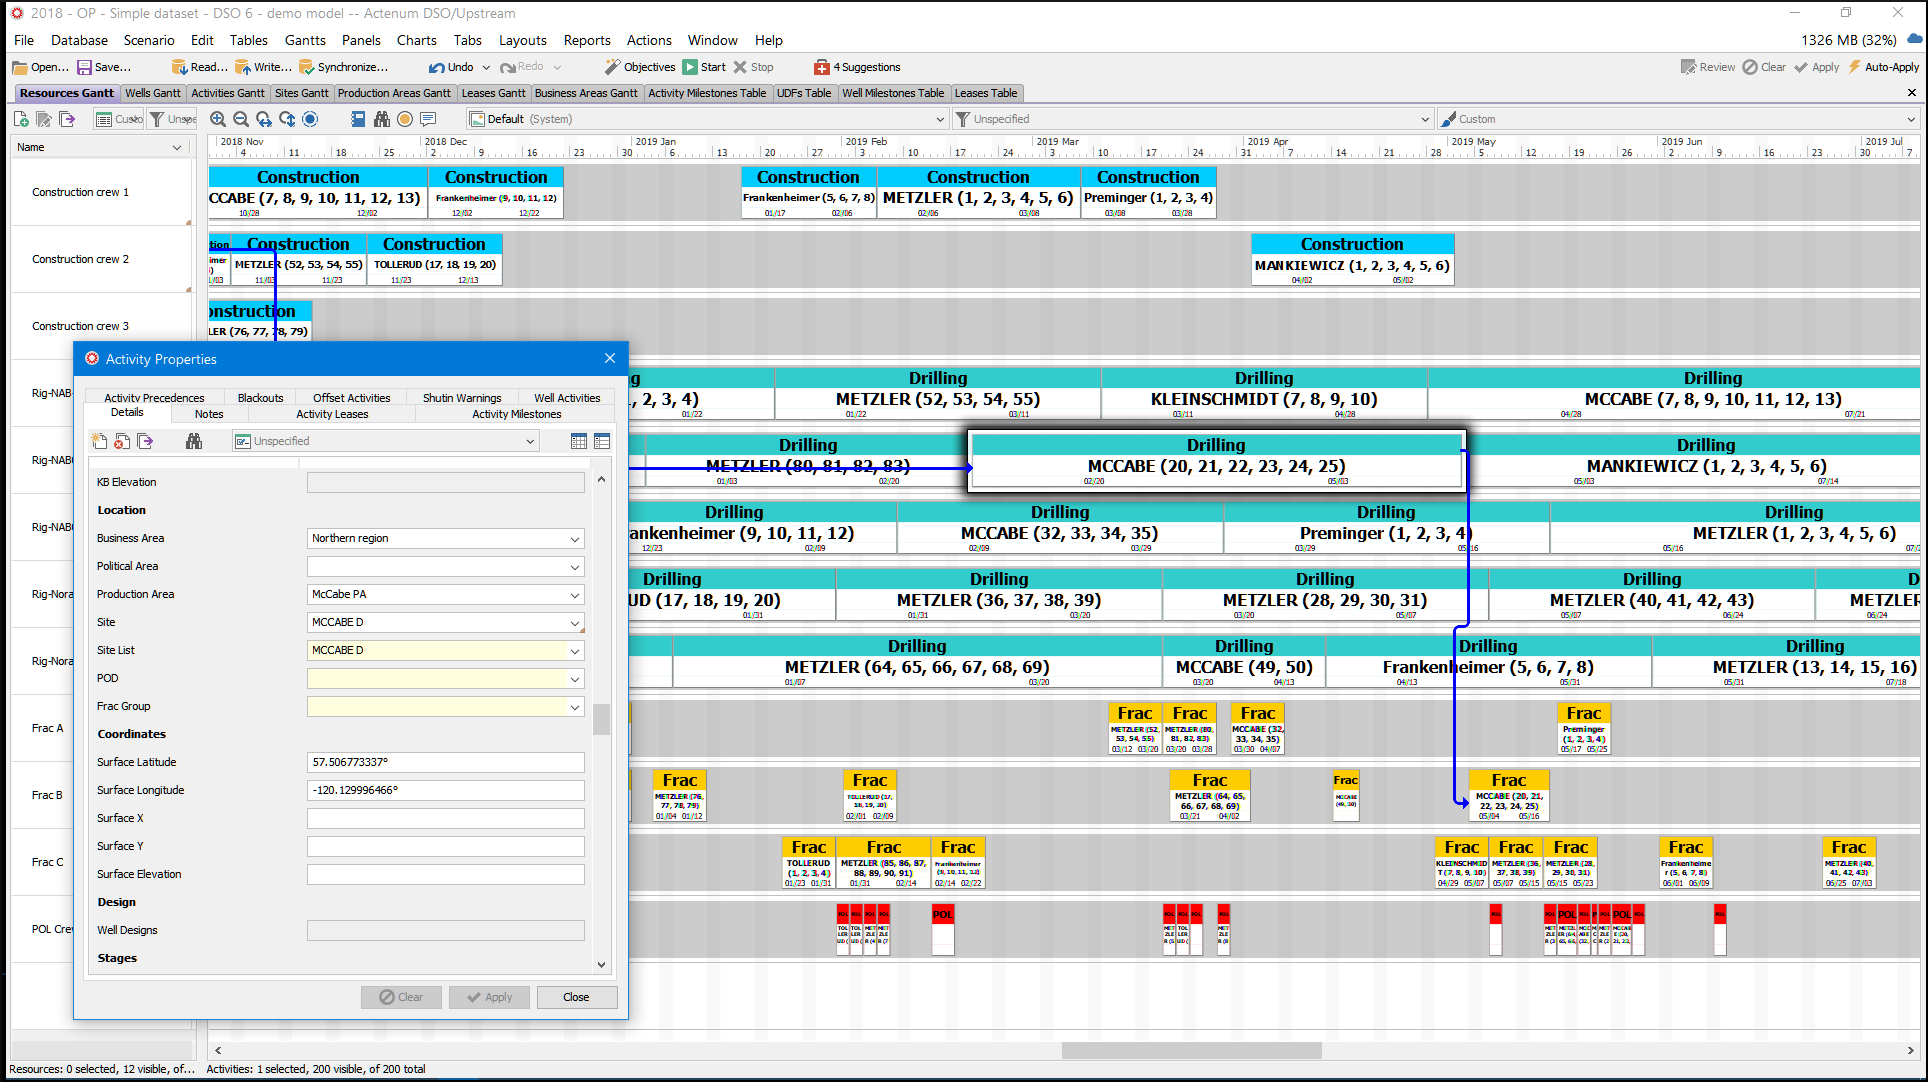 Figure 1: Resource Gantt Chart with drag and drop scheduling